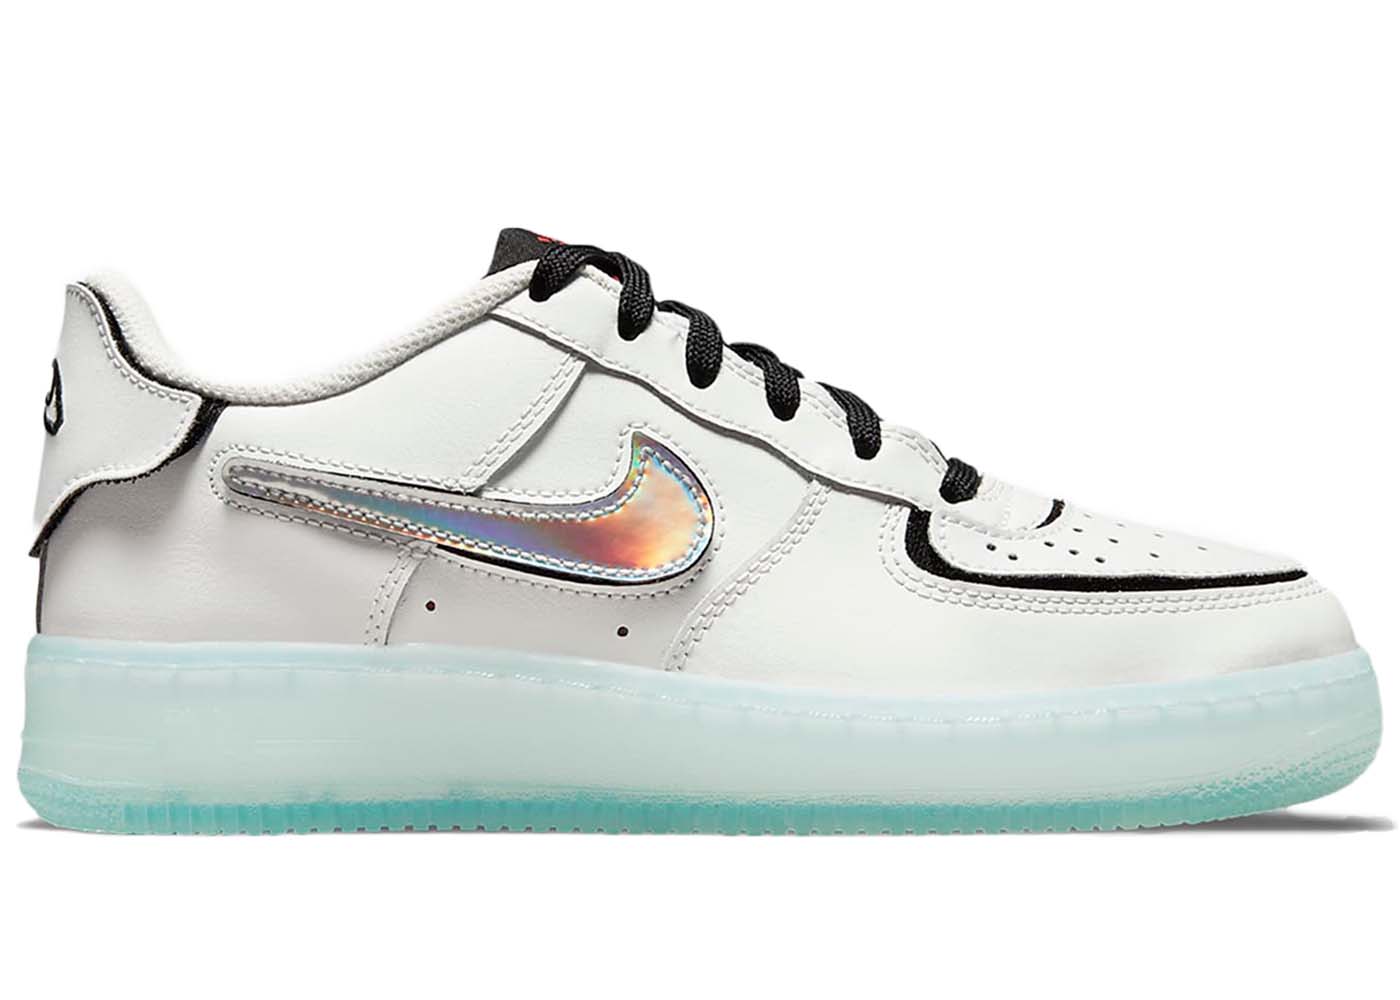 Nike Air Force 1/1 Low AF1 Mix White (GS)